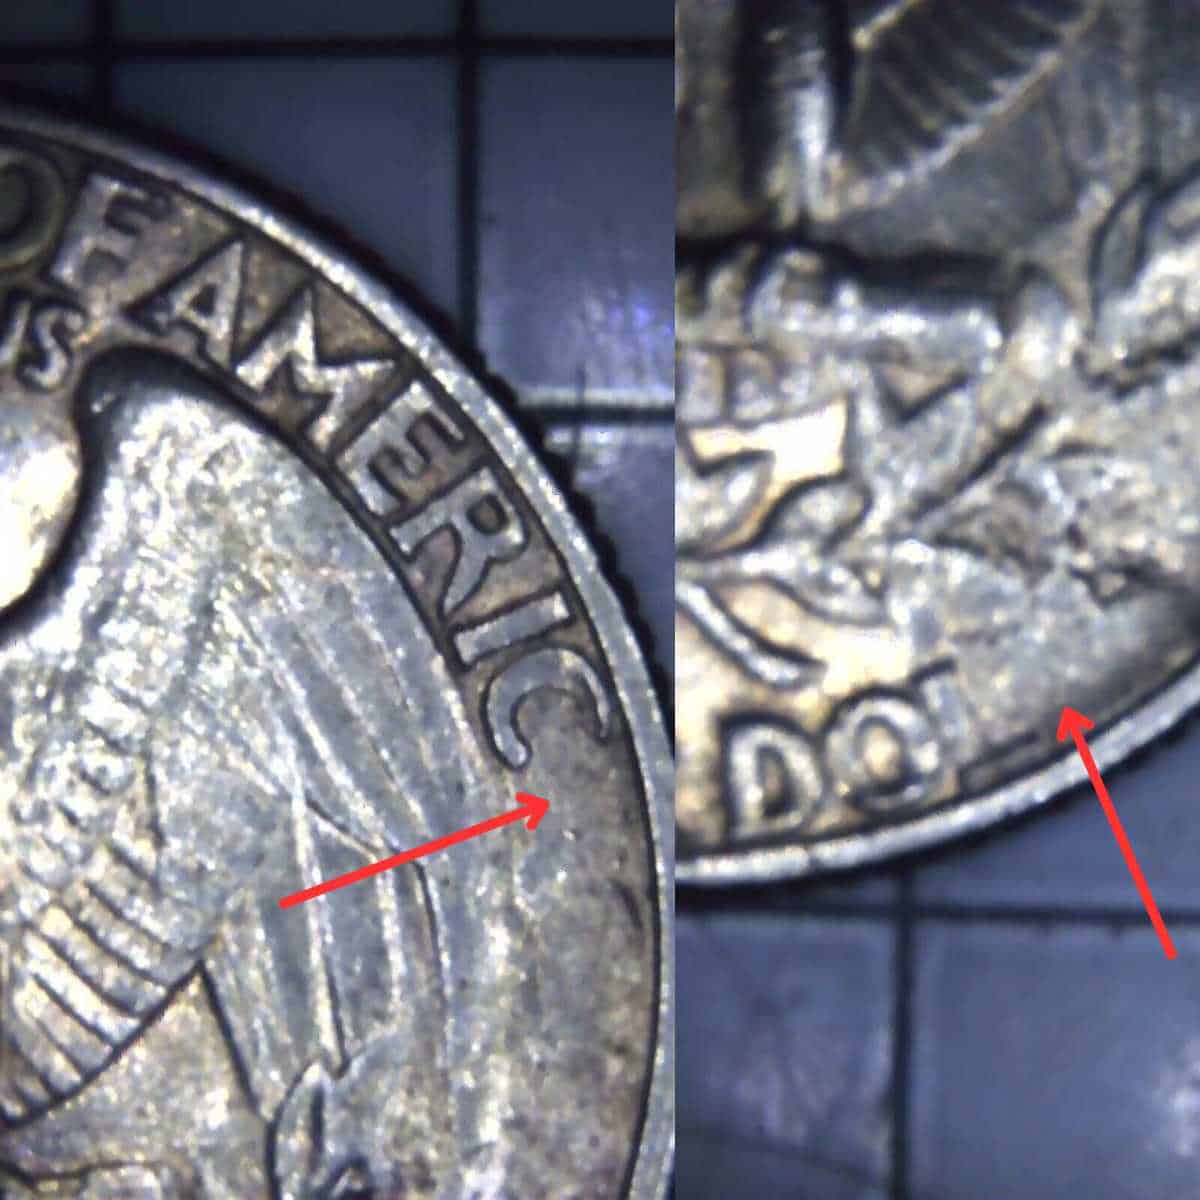 1986 P Quarter with Missing letters in reverse Error